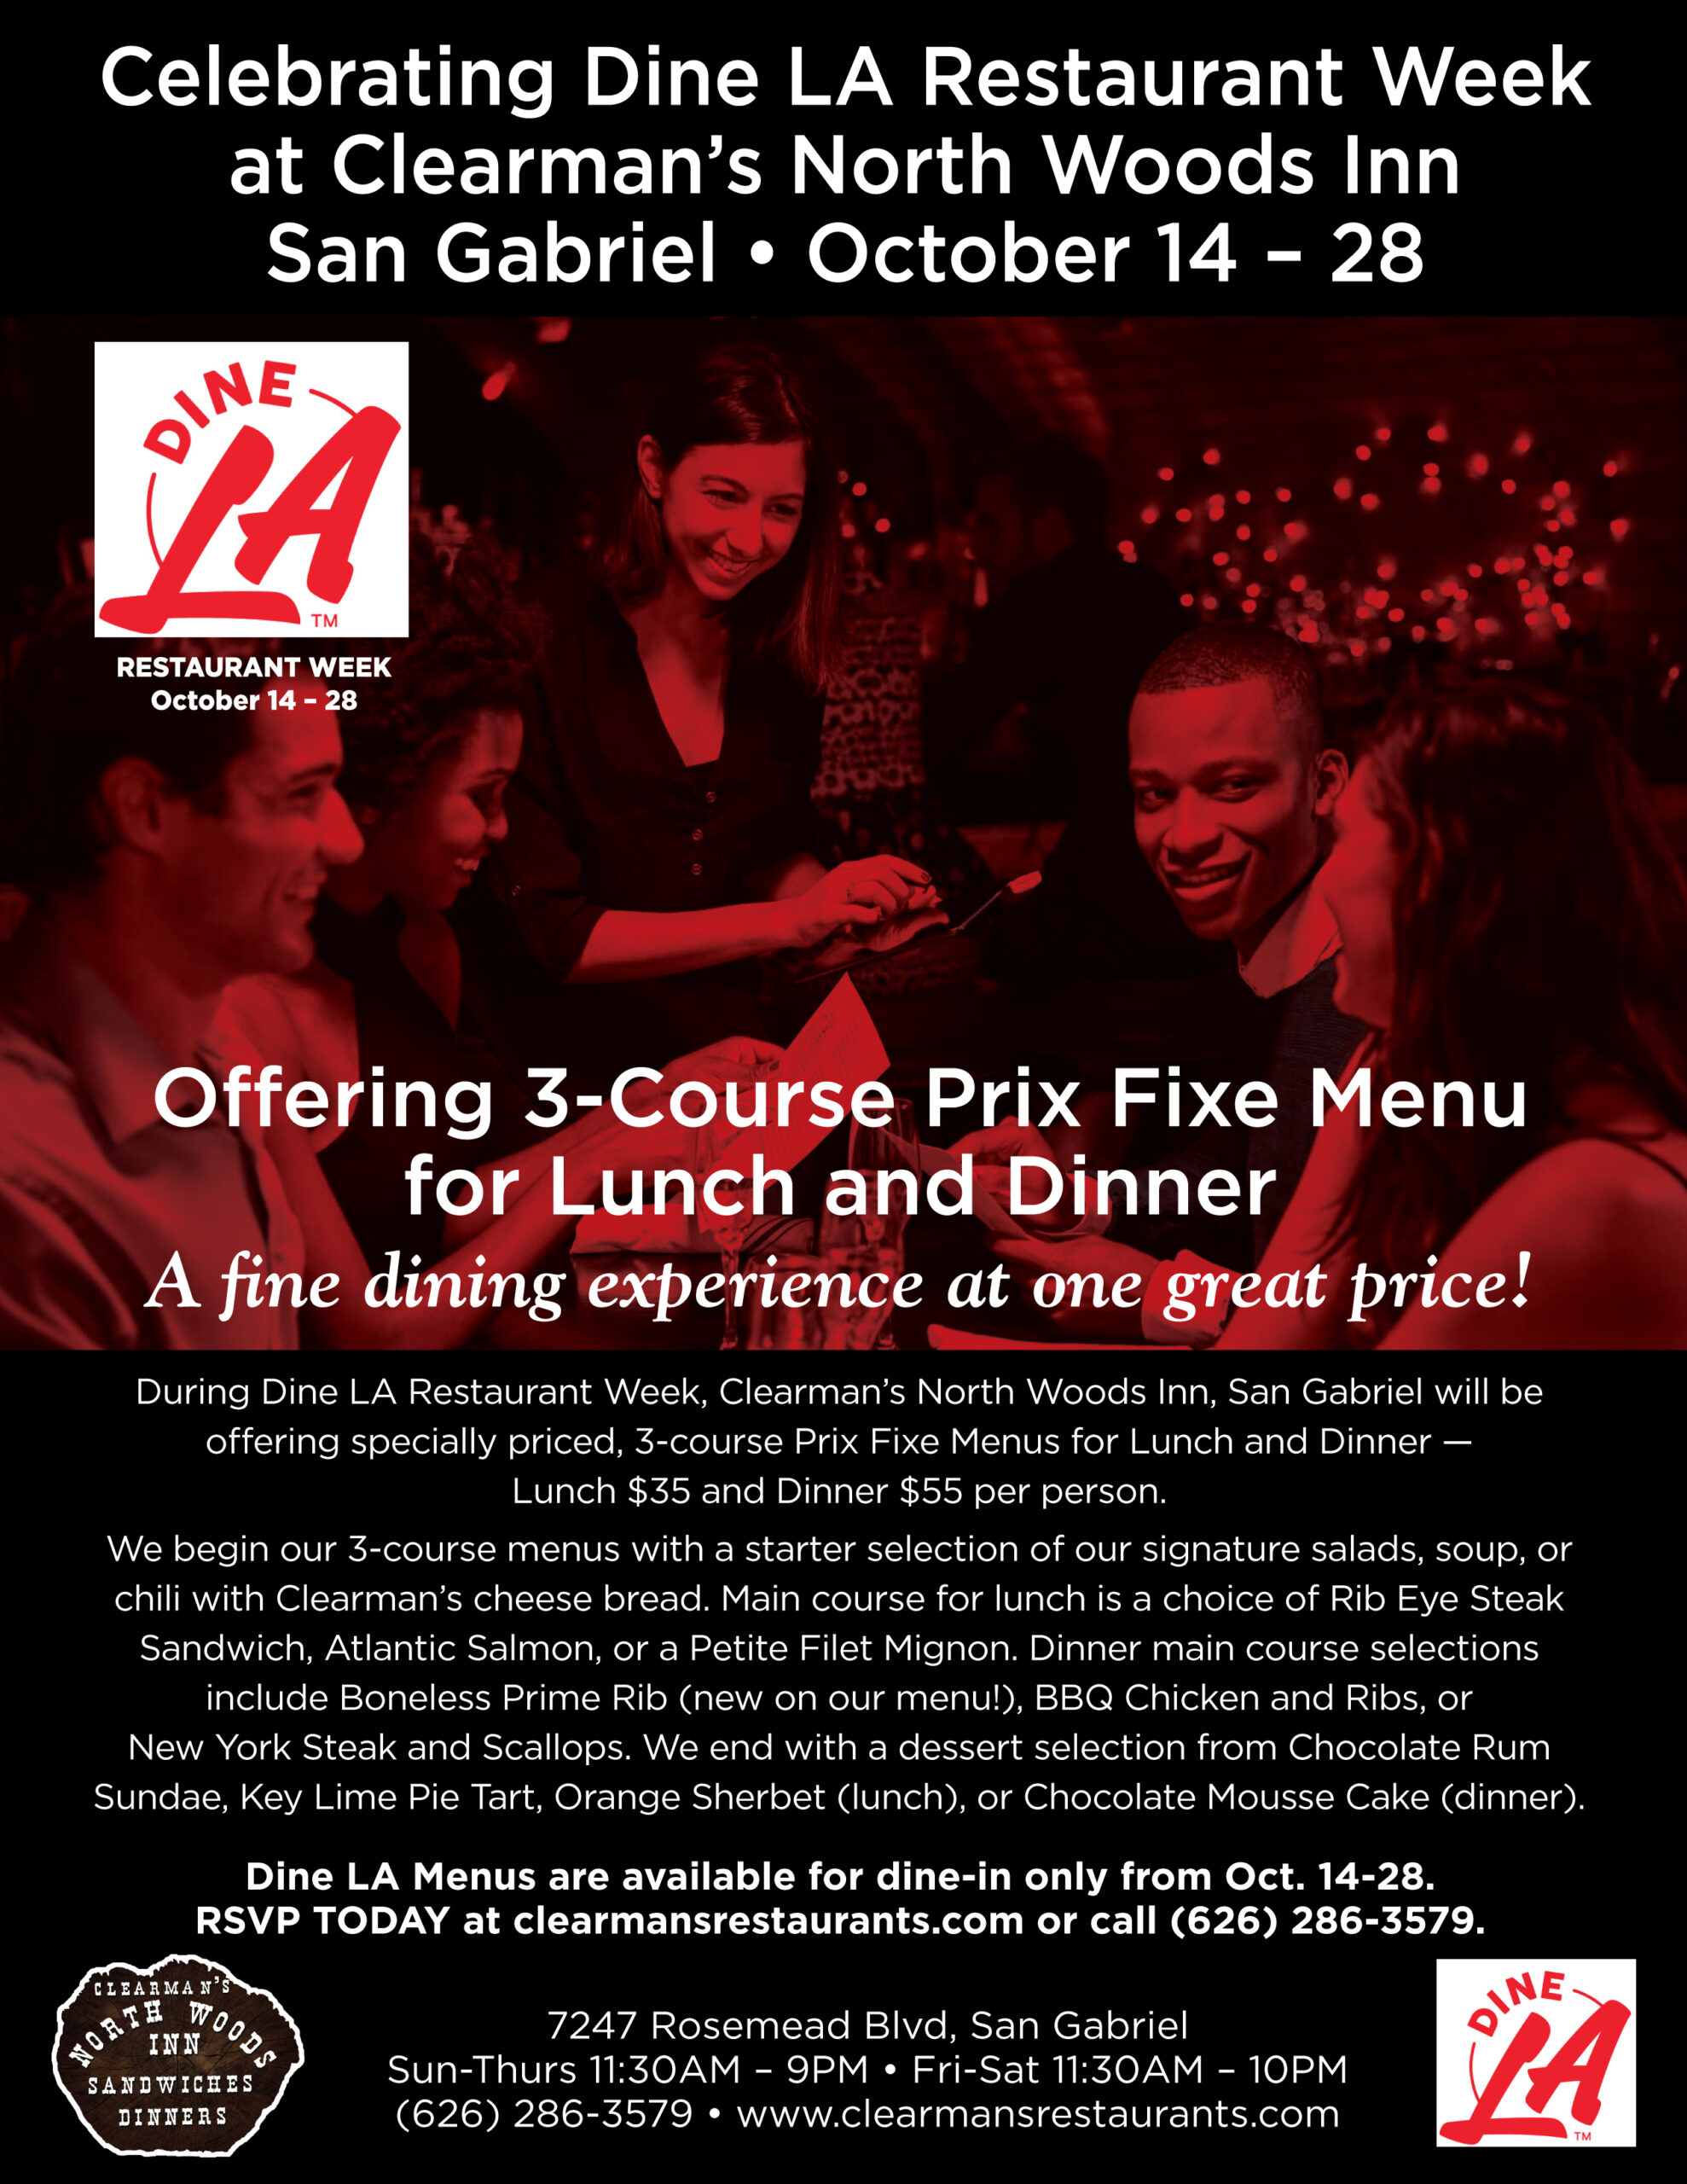 black flyer with red lettering and Dine LA logo showing people eating dinner with red tinted lighting 